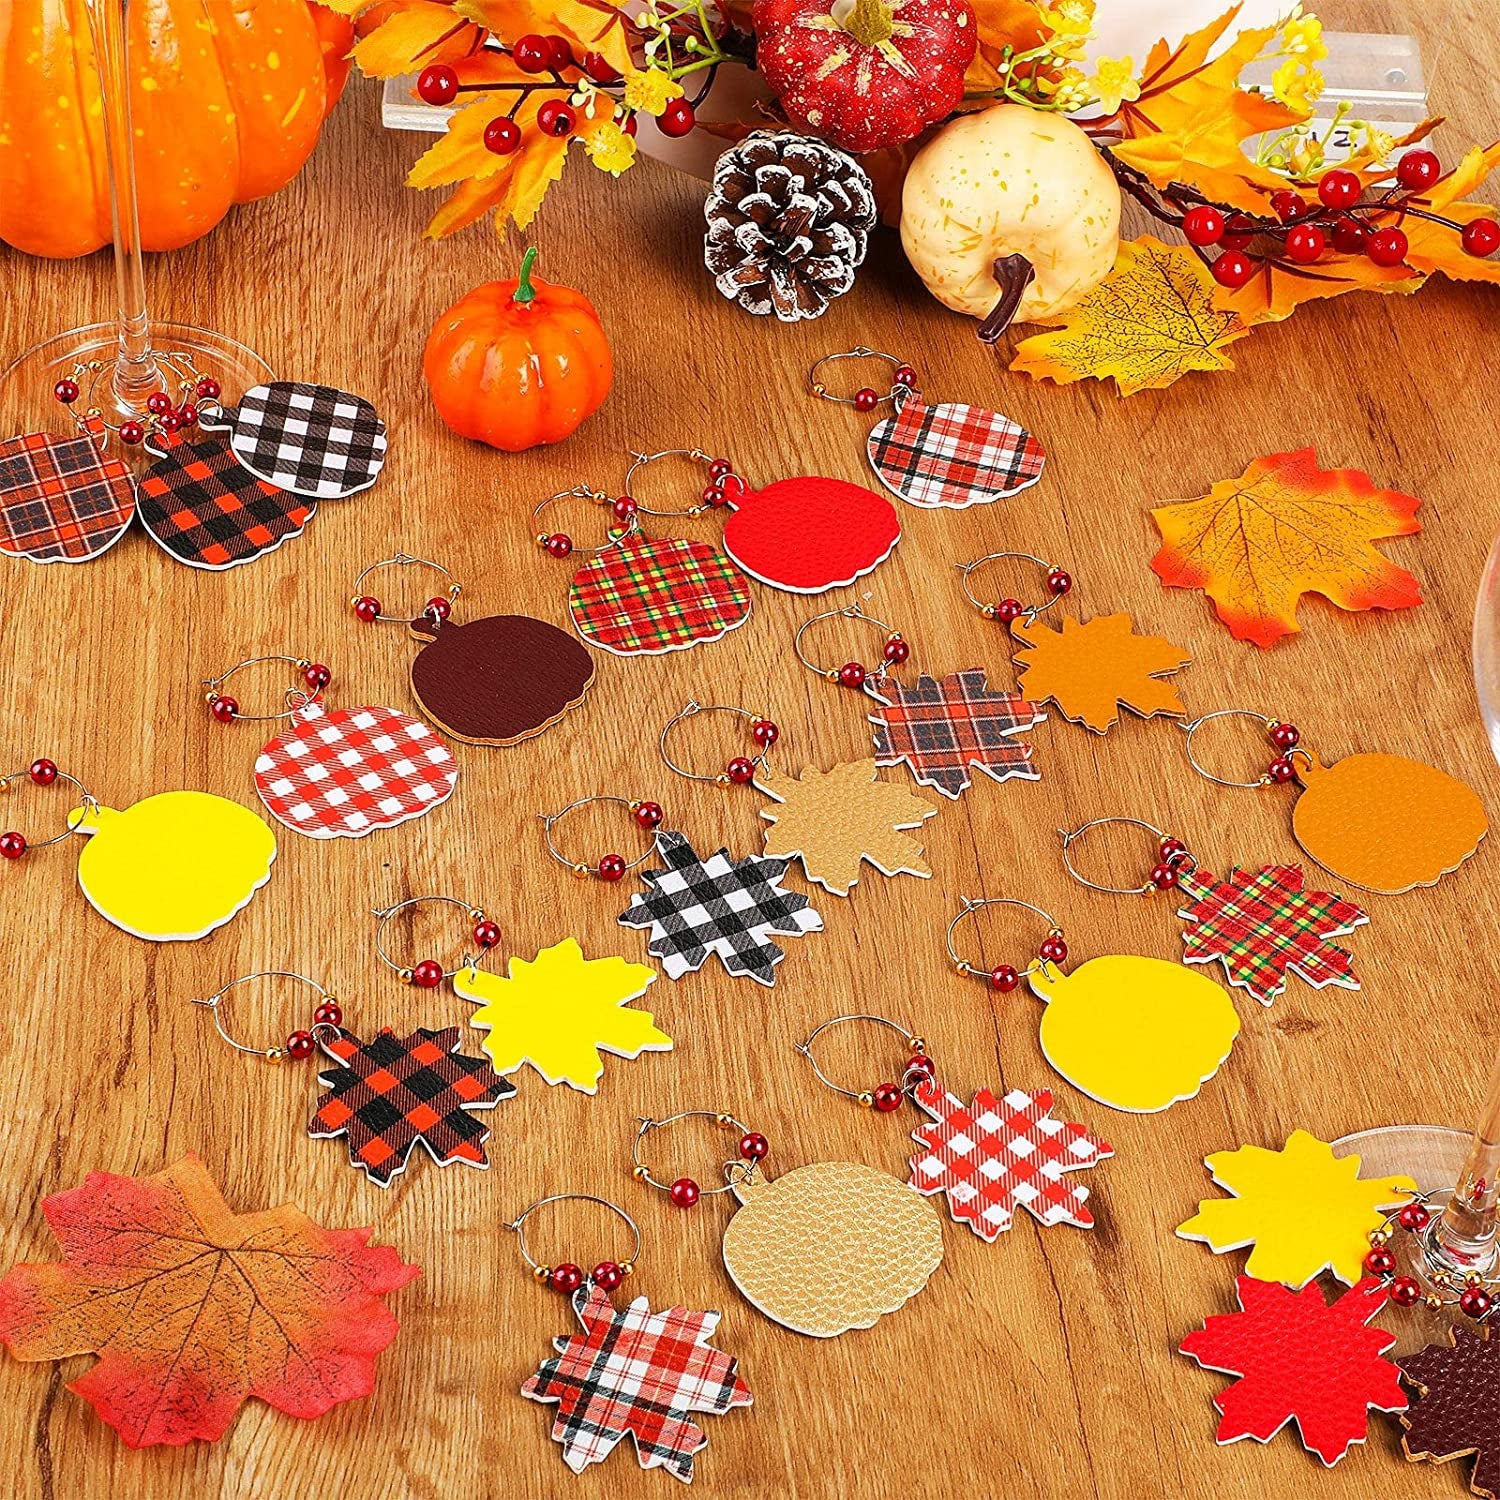 the fall-themed wine glass charms shaped like pumpkins and leaves, and in various plaid and solid colored prints